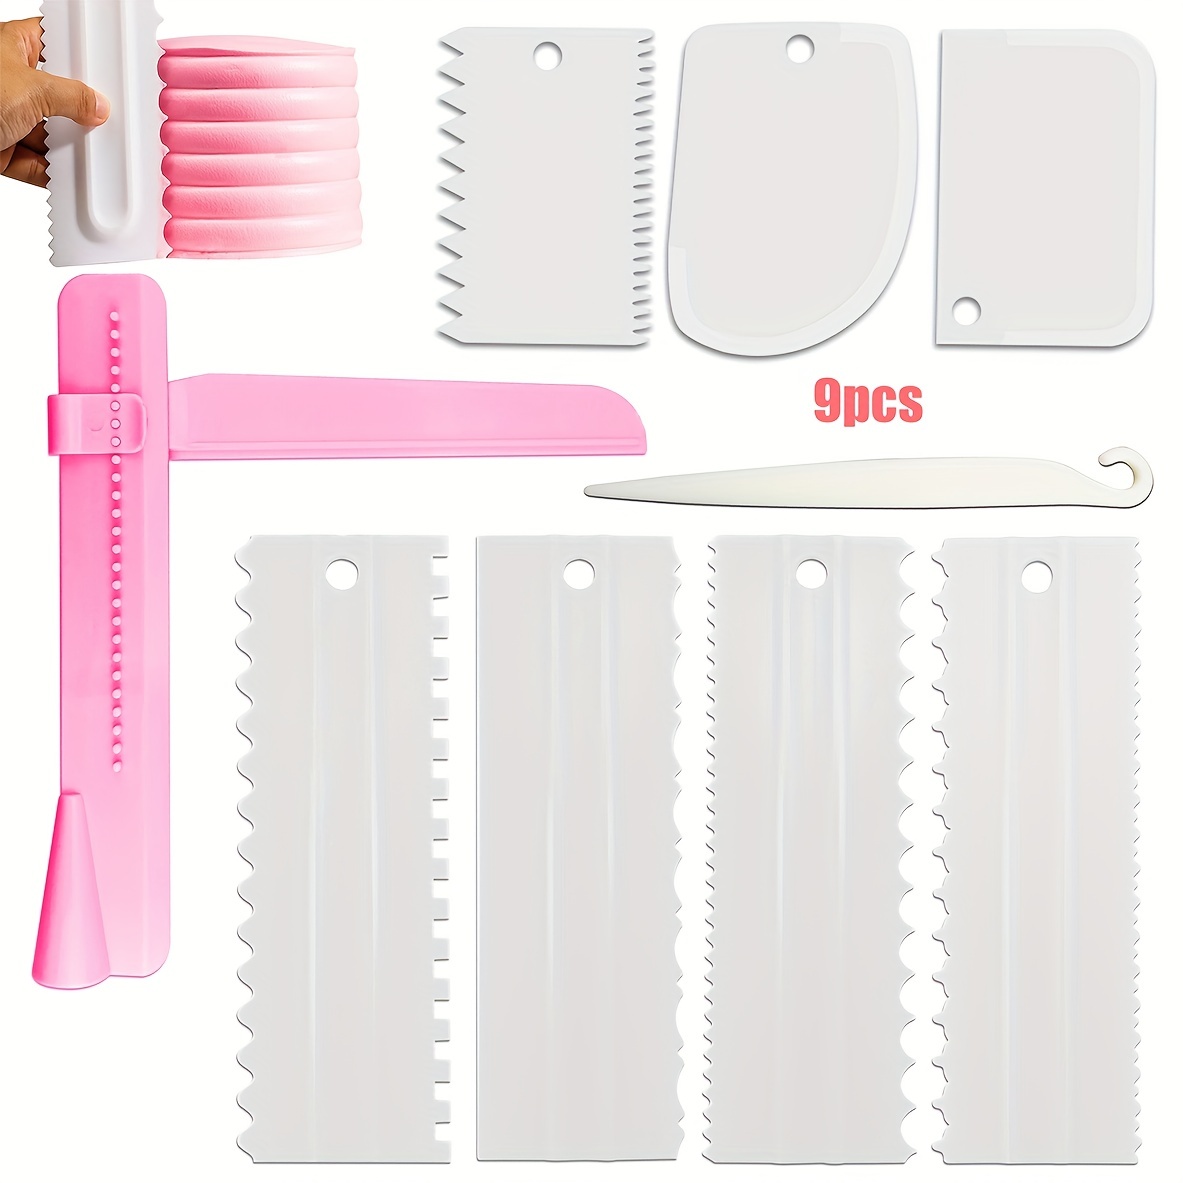 6 Pieces Stainless-Steel Cake Scraper Set, Double Sided Patterned Comb Metal Scraper 9 inch, Edge Stripe Edge Baking Tools Smoother Scraper for